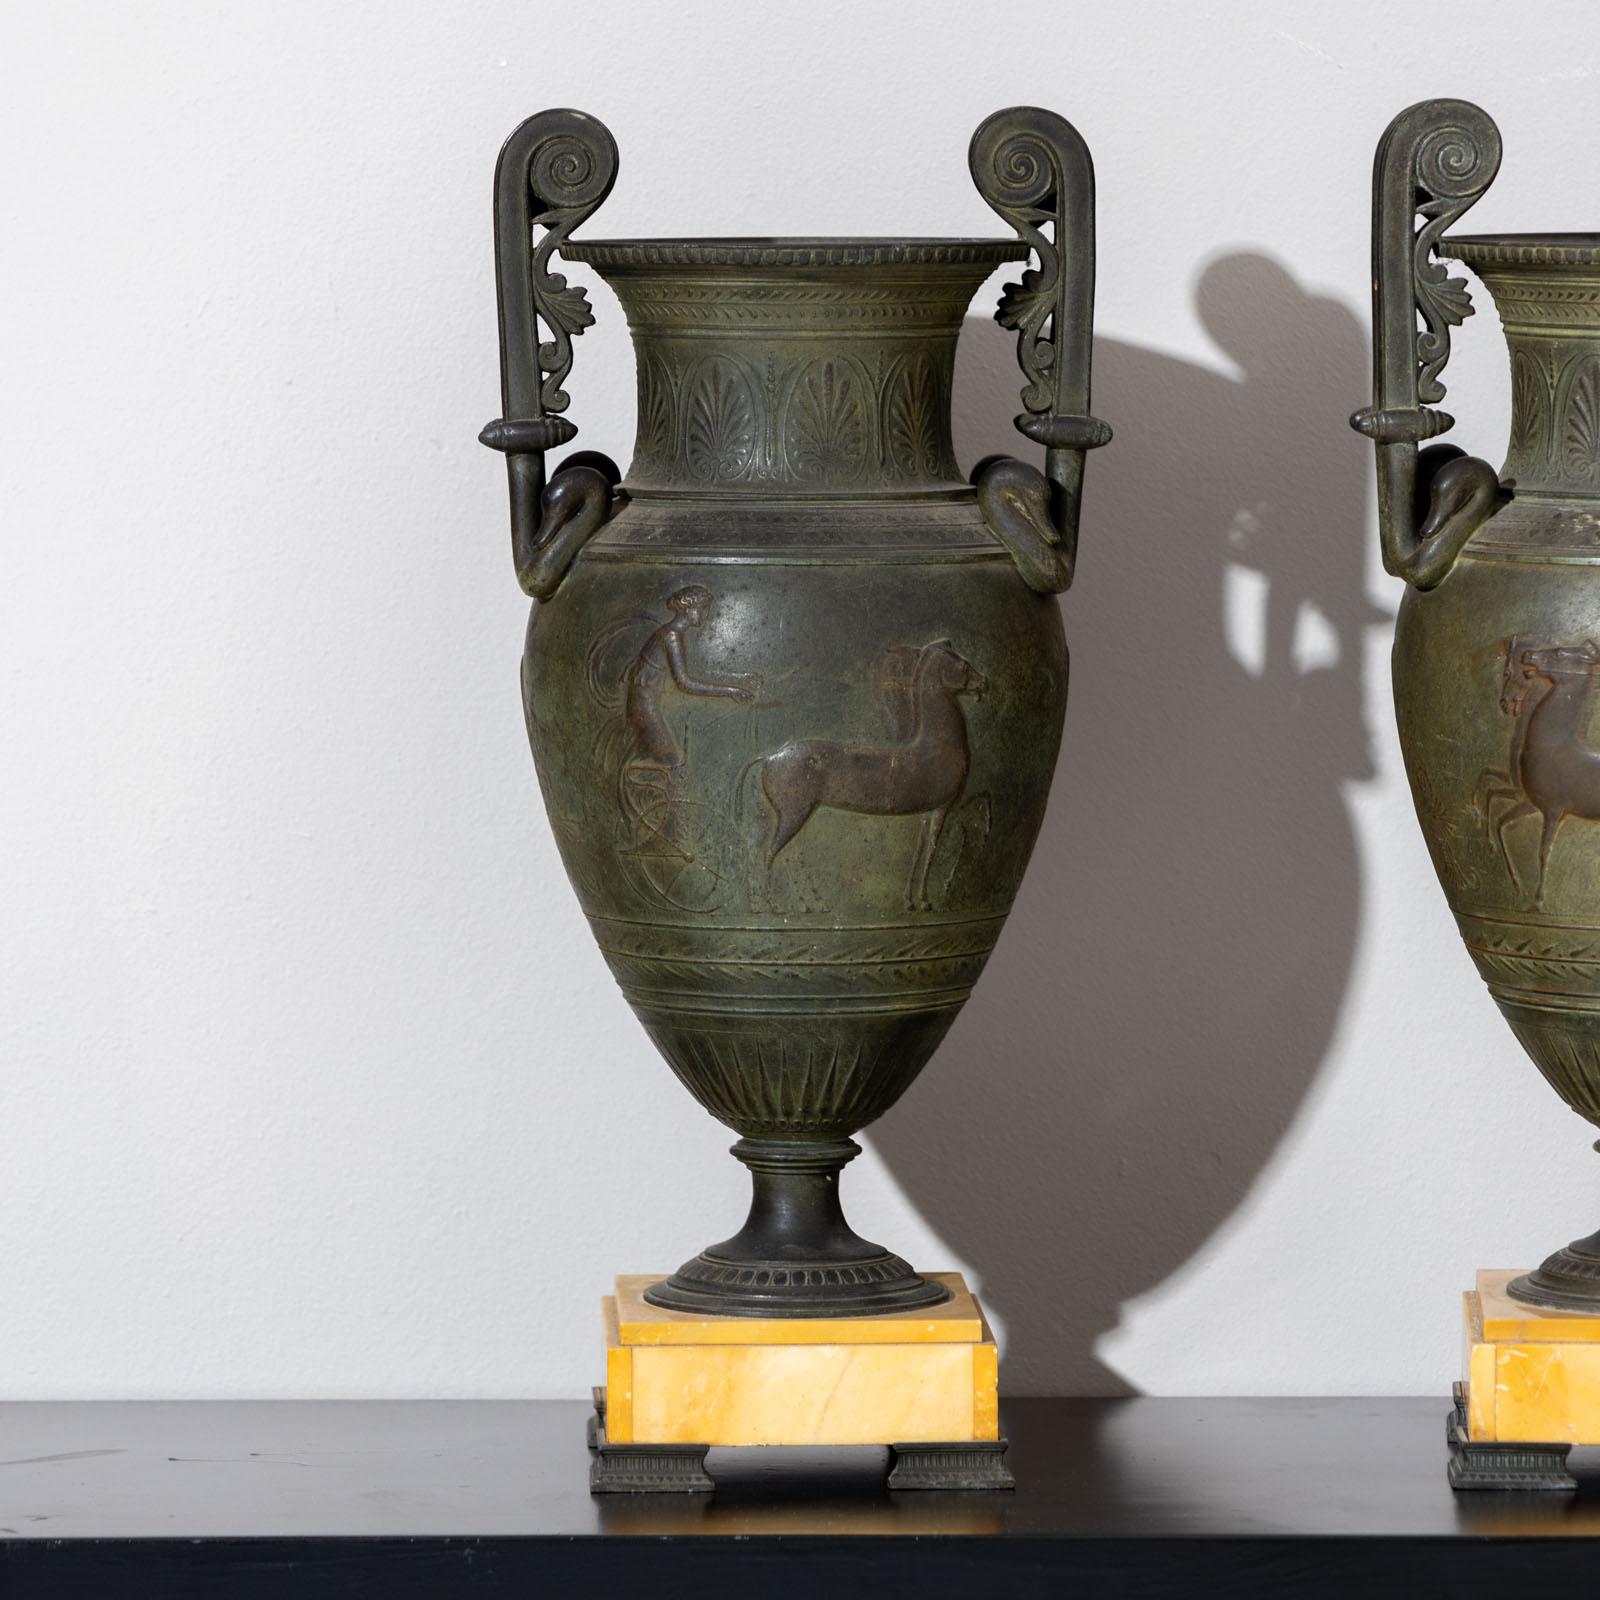 Pair of bronze volute craters with chariots on the wall. The vases stand on square plinths made of Siena marble (5.5 x 14 x 14 cm).